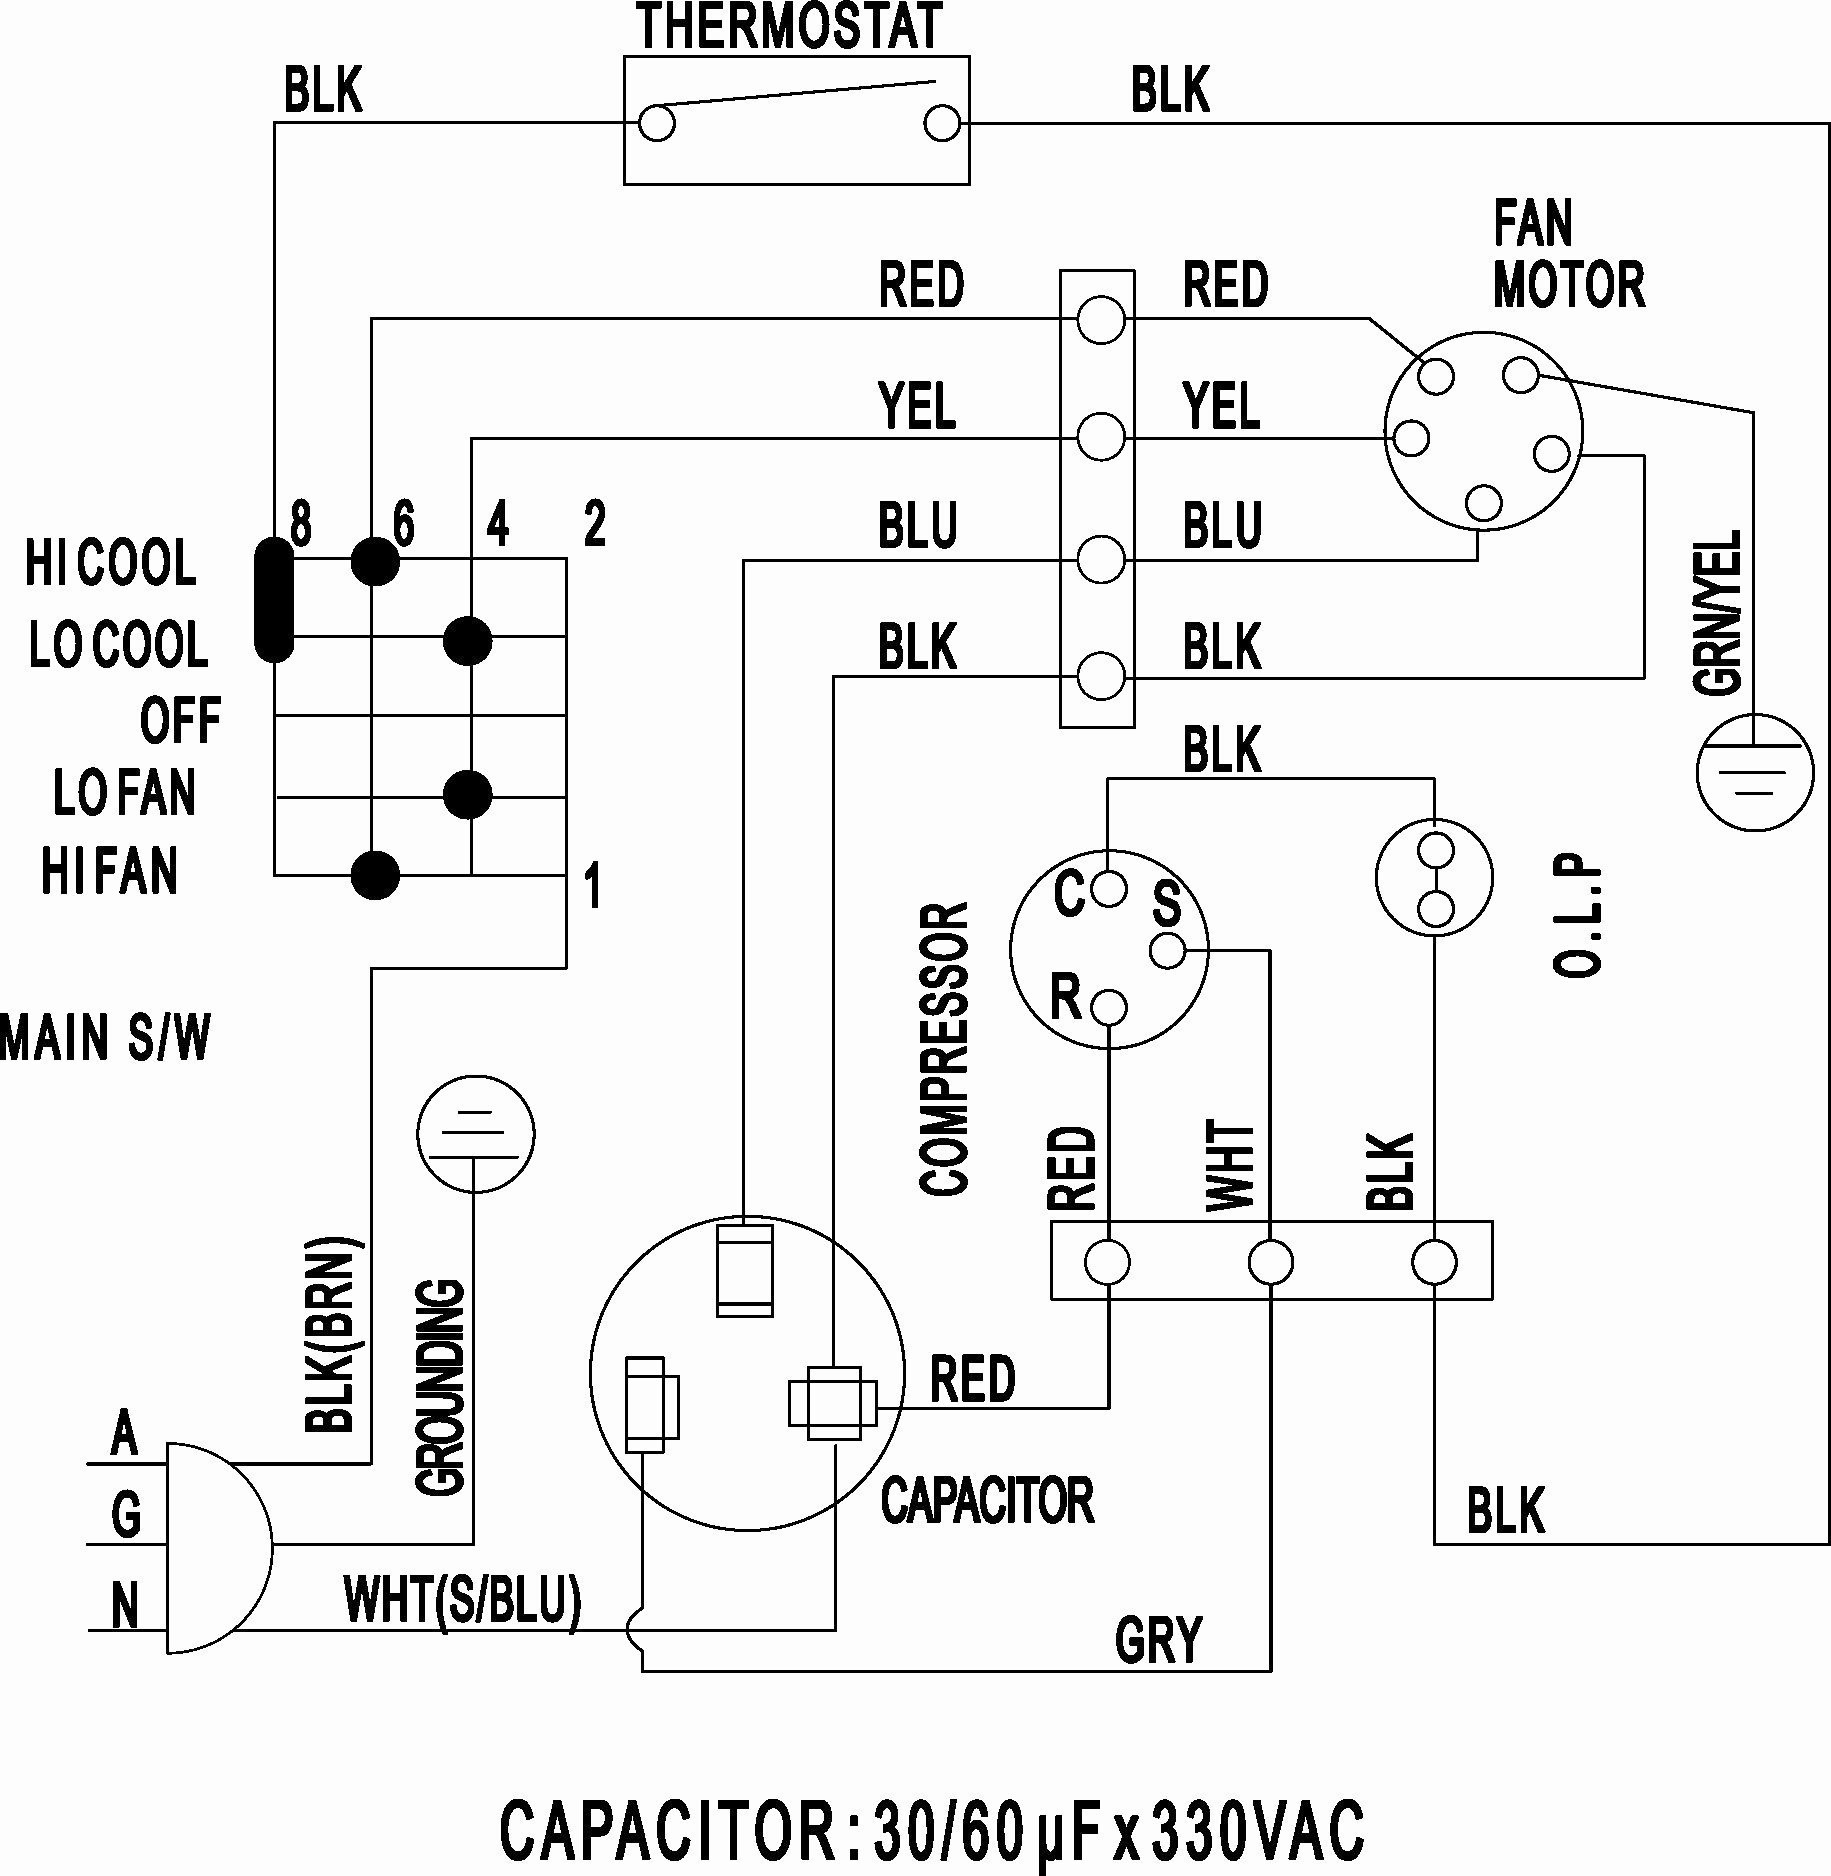 Wiring Diagram for Hvac Capacitor Best Hvac Condenser Wiring Diagram Fresh Wiring Diagram Ac Split Refrence